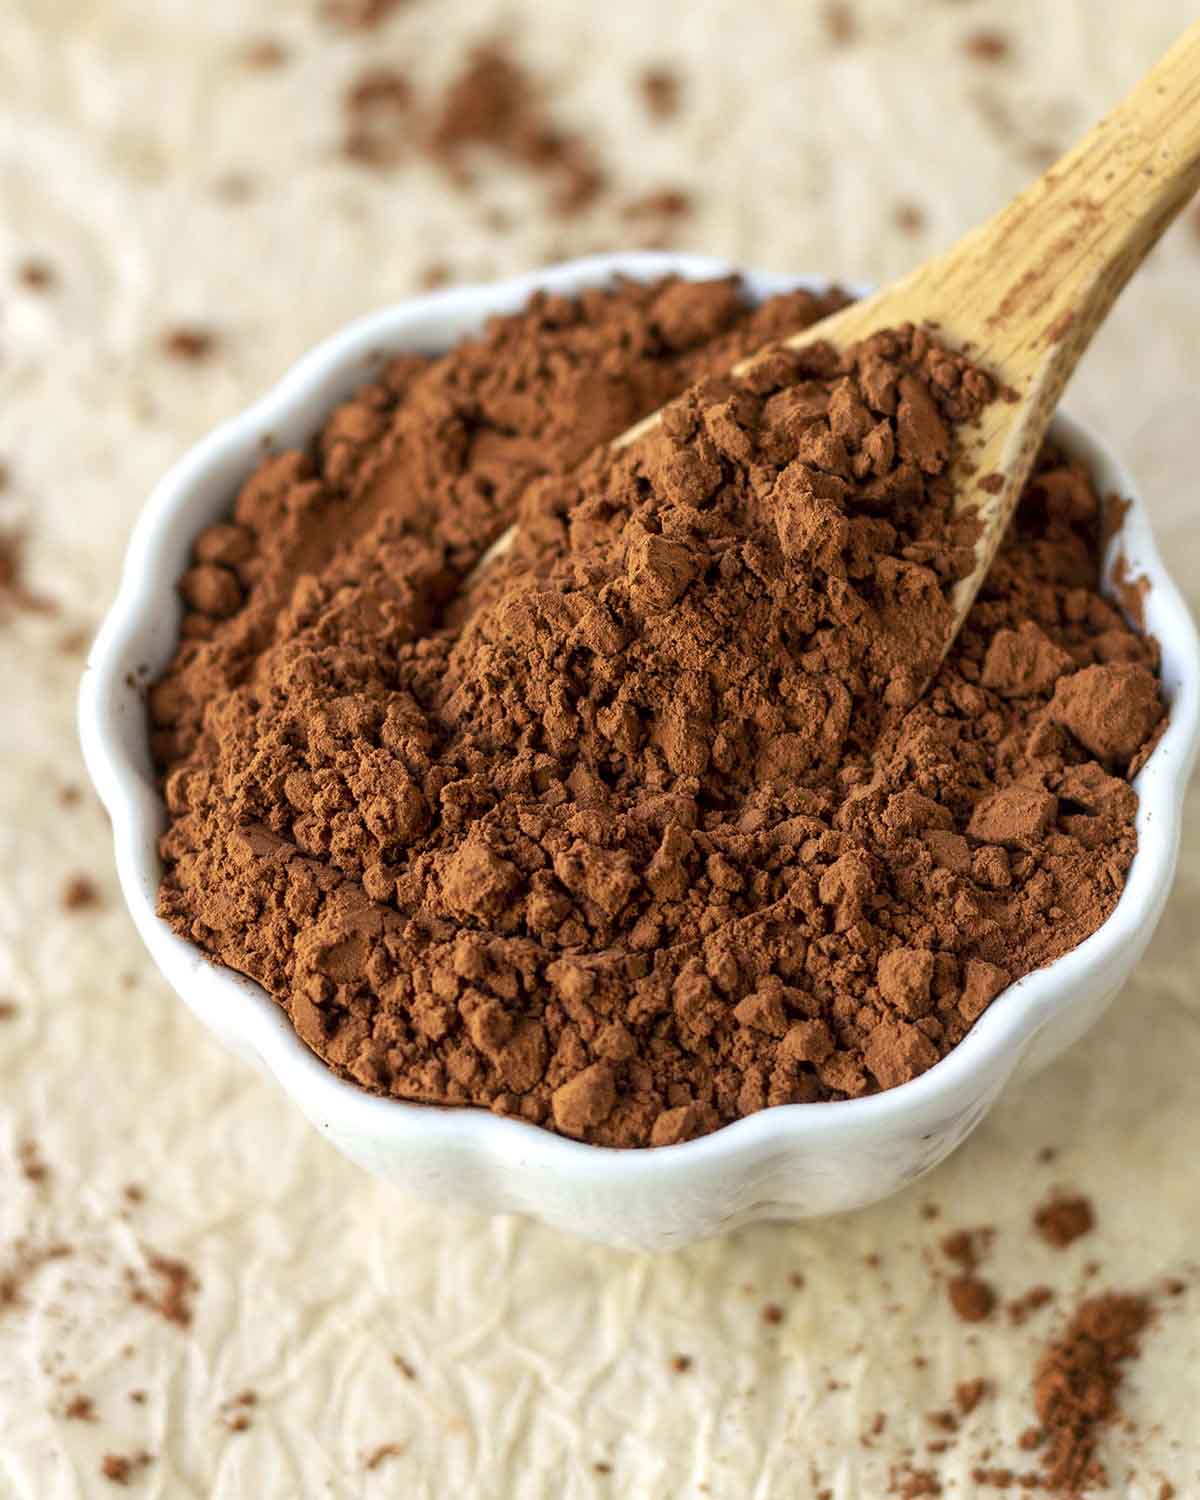 Vegan cocoa powder in a small white bowl, a small wood spoon is in the bowl.